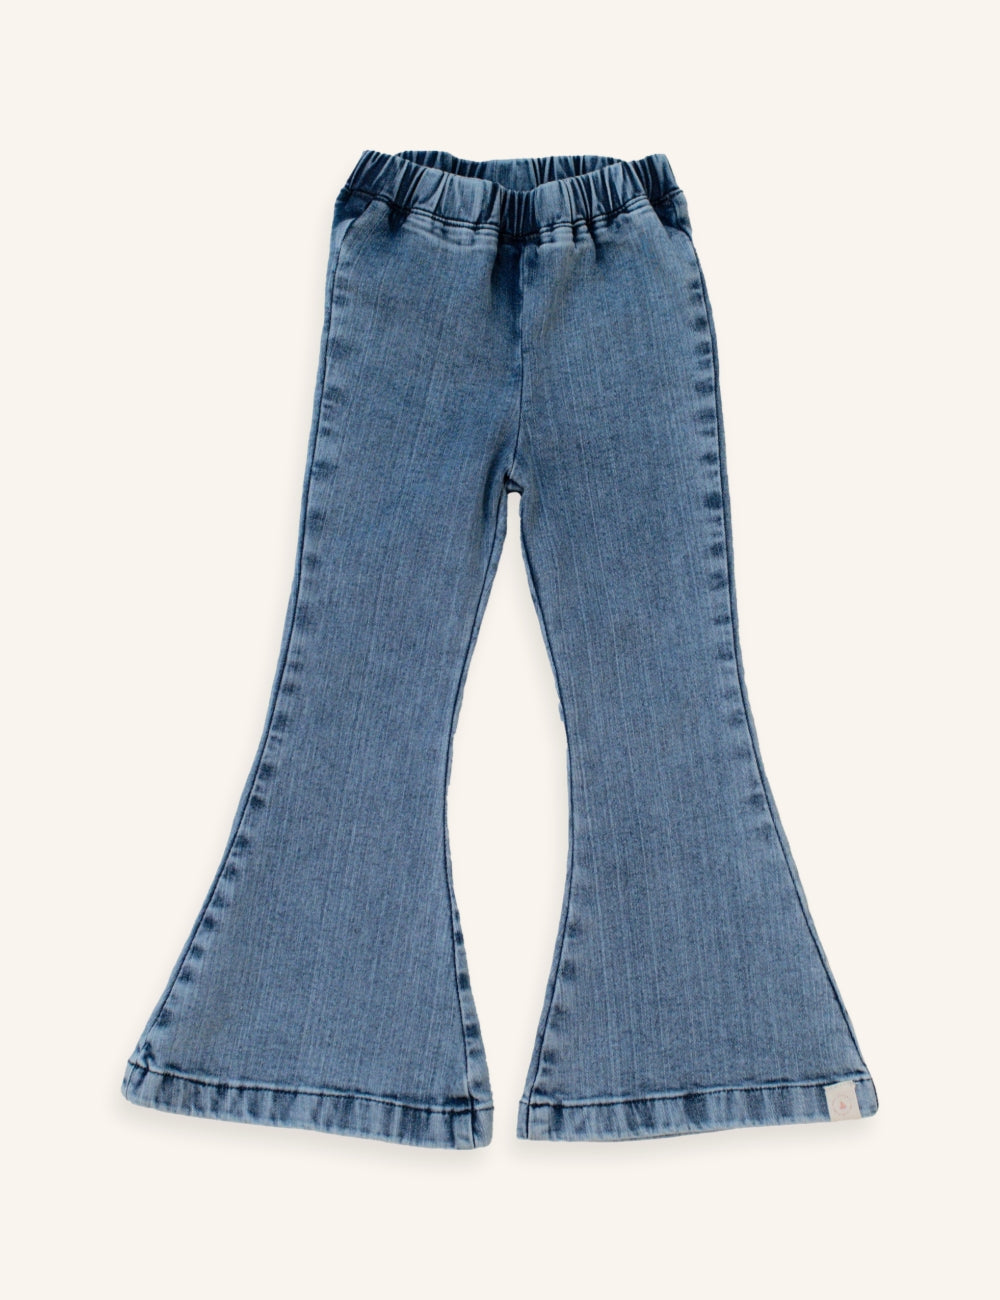 Billy jeans flared, navy natural